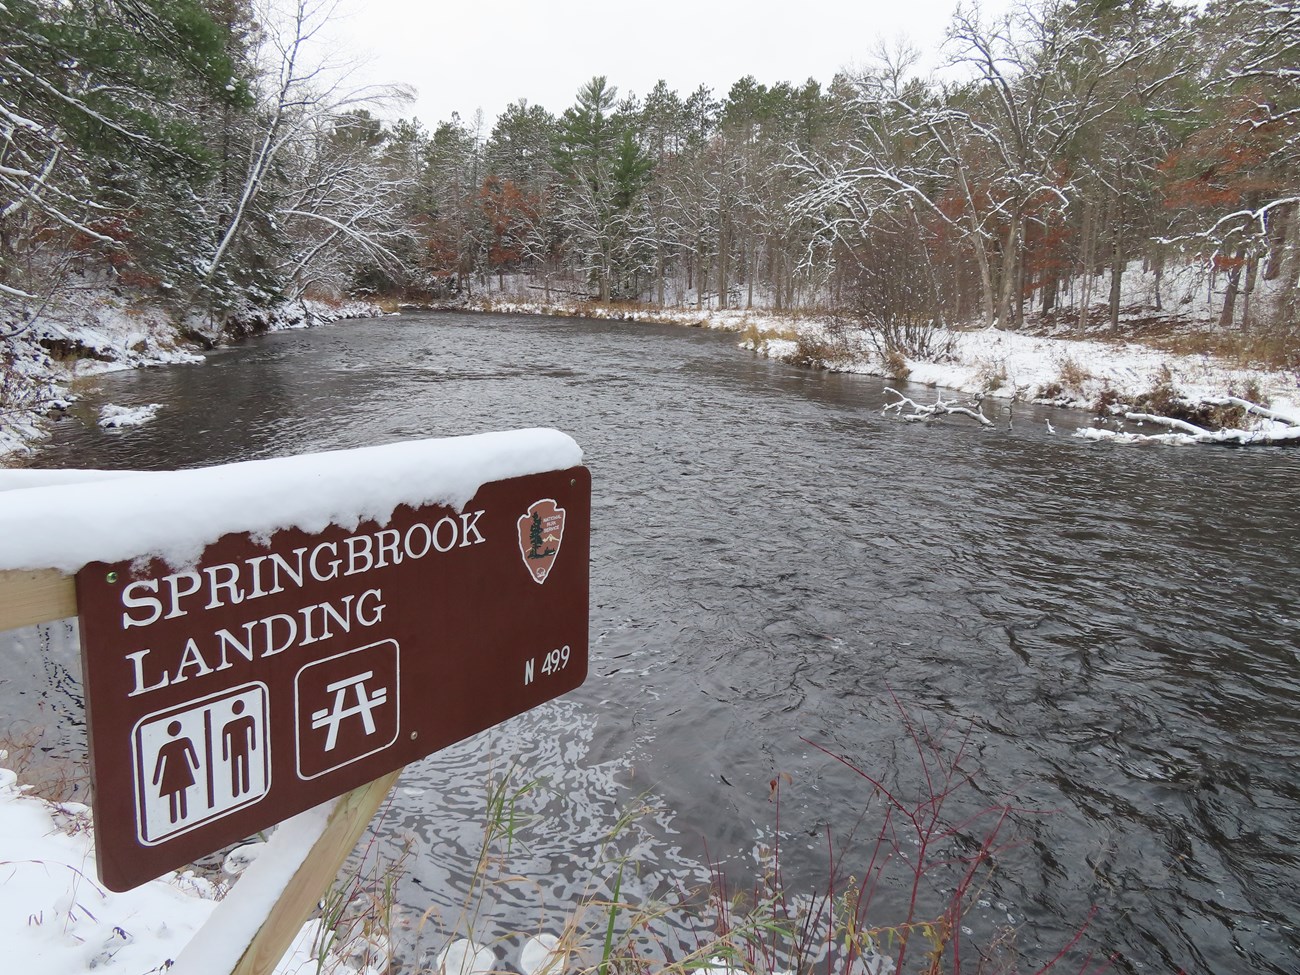 A snow-covered brown sign with white lettering reads Springbrook Landing above a flowing river with a light blanket of snow covering the stream's edges and forest.